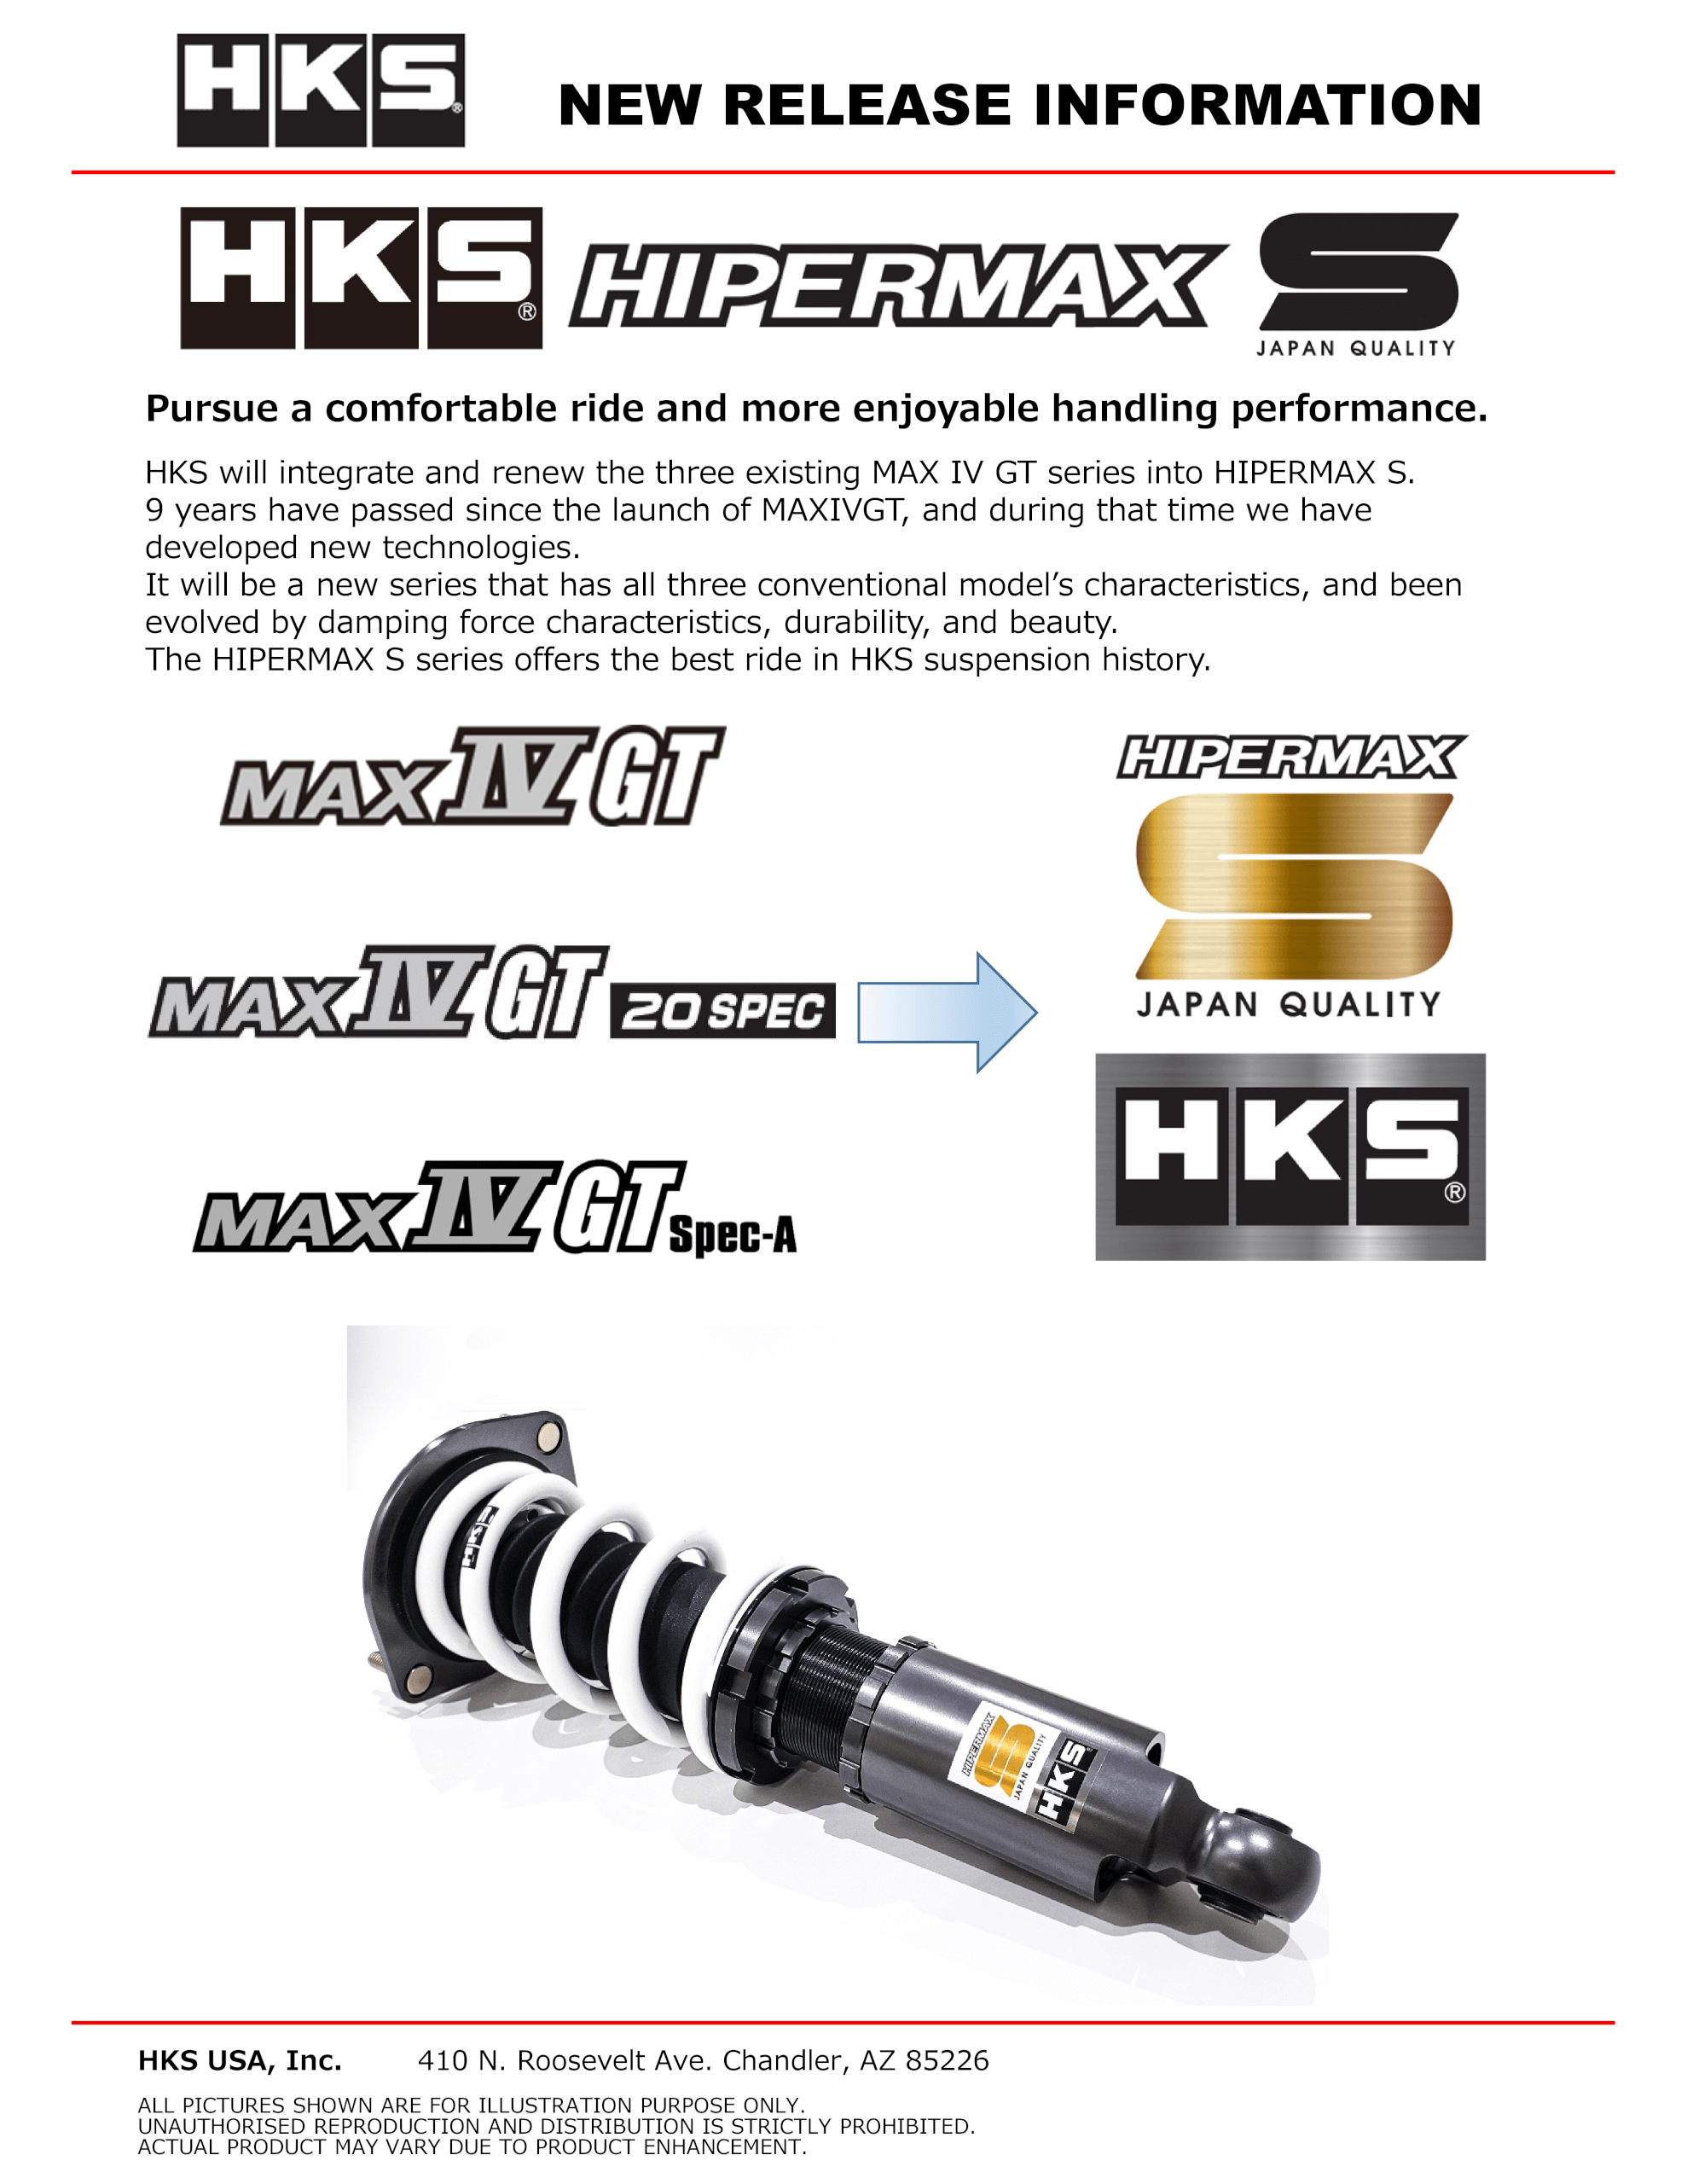 New Product Info_HIPERMAX S 011221-01.png